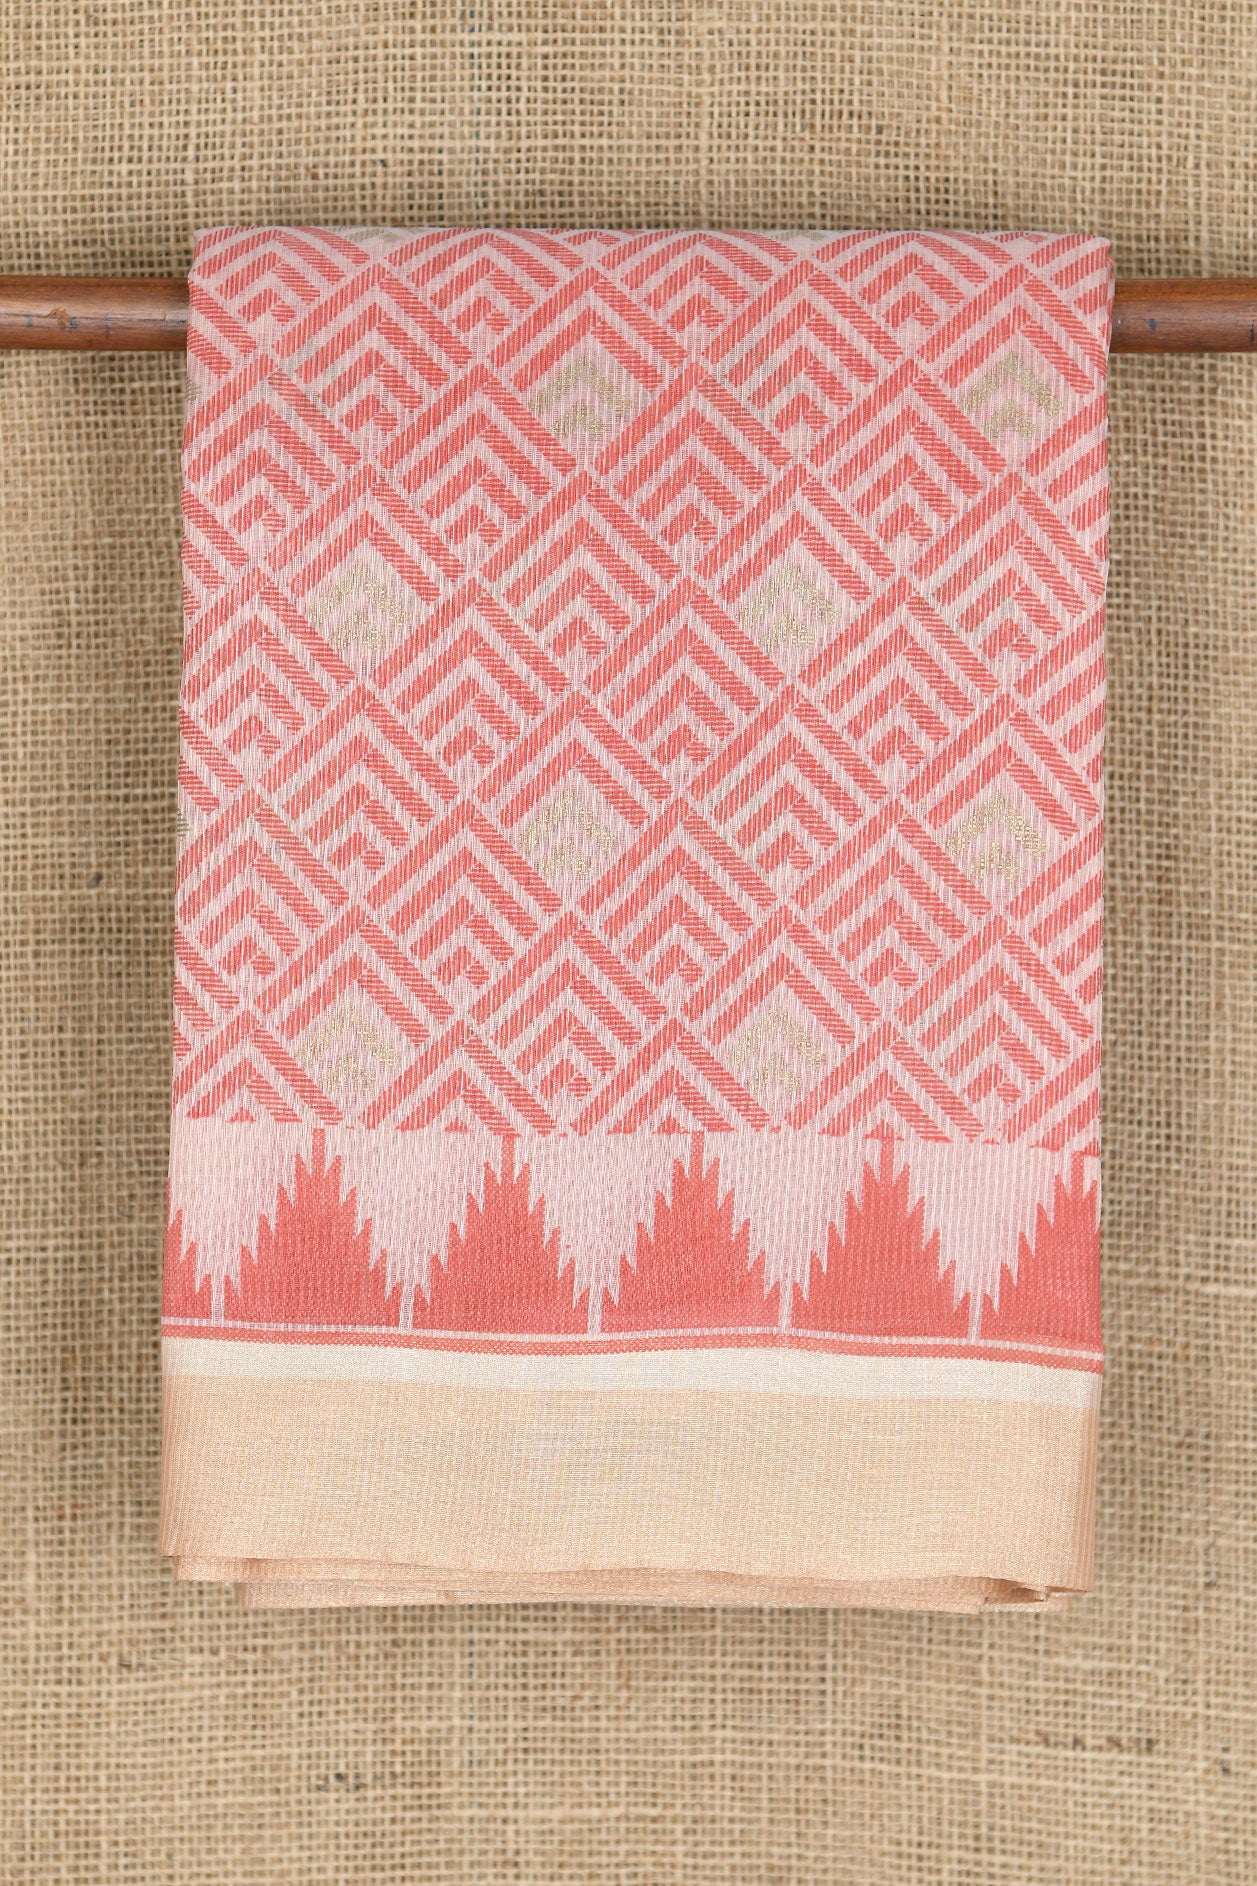 Temple Border With Geometric Pattern Cream Color And Red Kota Cotton Saree